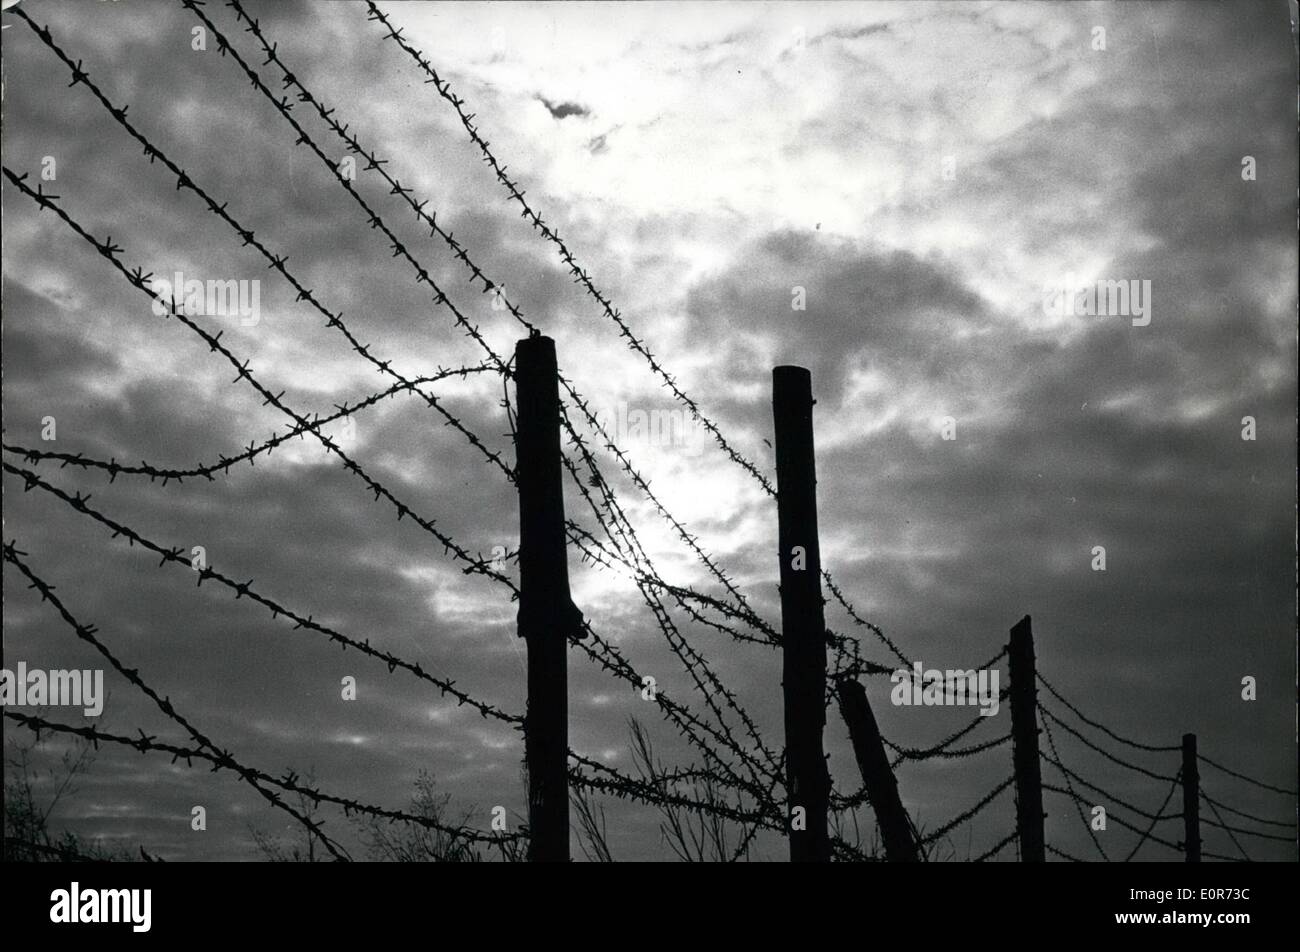 Jun. 06, 1958 - Day of German unification (June 17.): Through Germany barbed wire is put up, dividing our country since 13 years into two parts. Photo shows barbed wire at the border to Eastern Germany near Philipsthal, district Hersfeld. Stock Photo